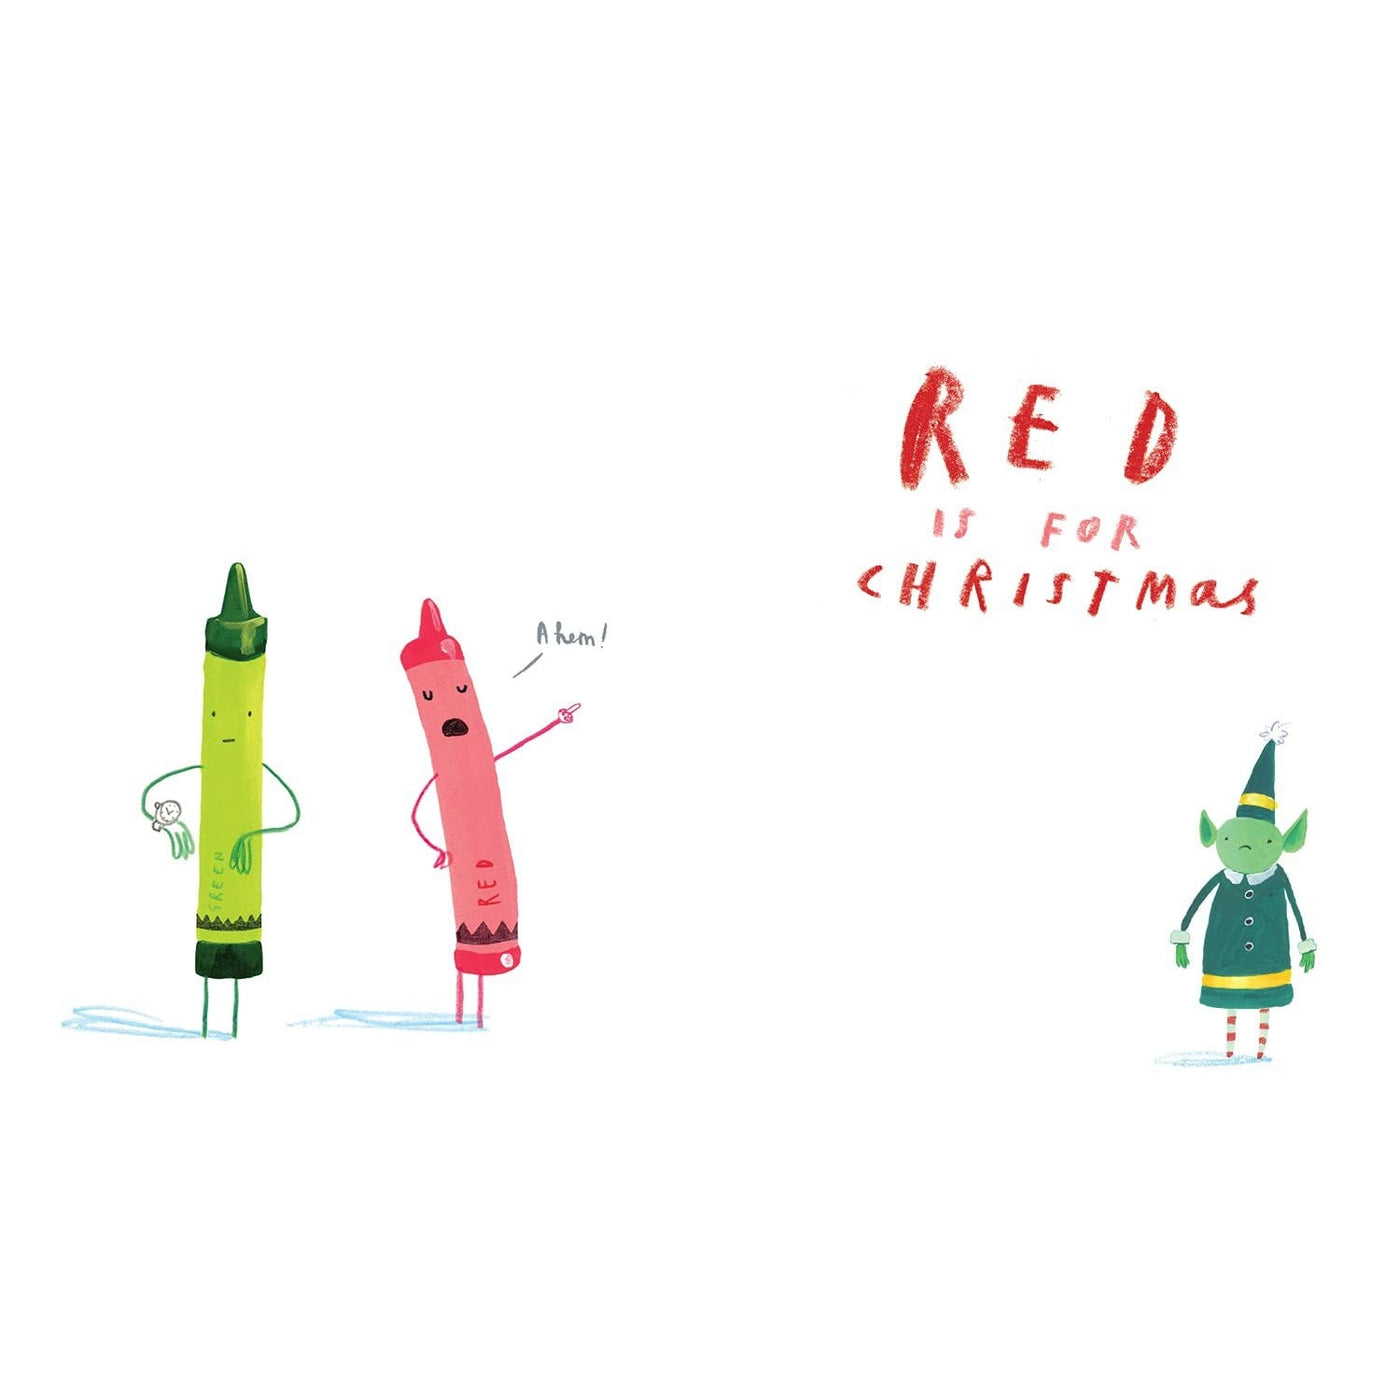 Green Is For Christmas: From The Creators Of The Bestselling The Day The Crayons Quit - Drew Daywalt & Oliver Jeffers